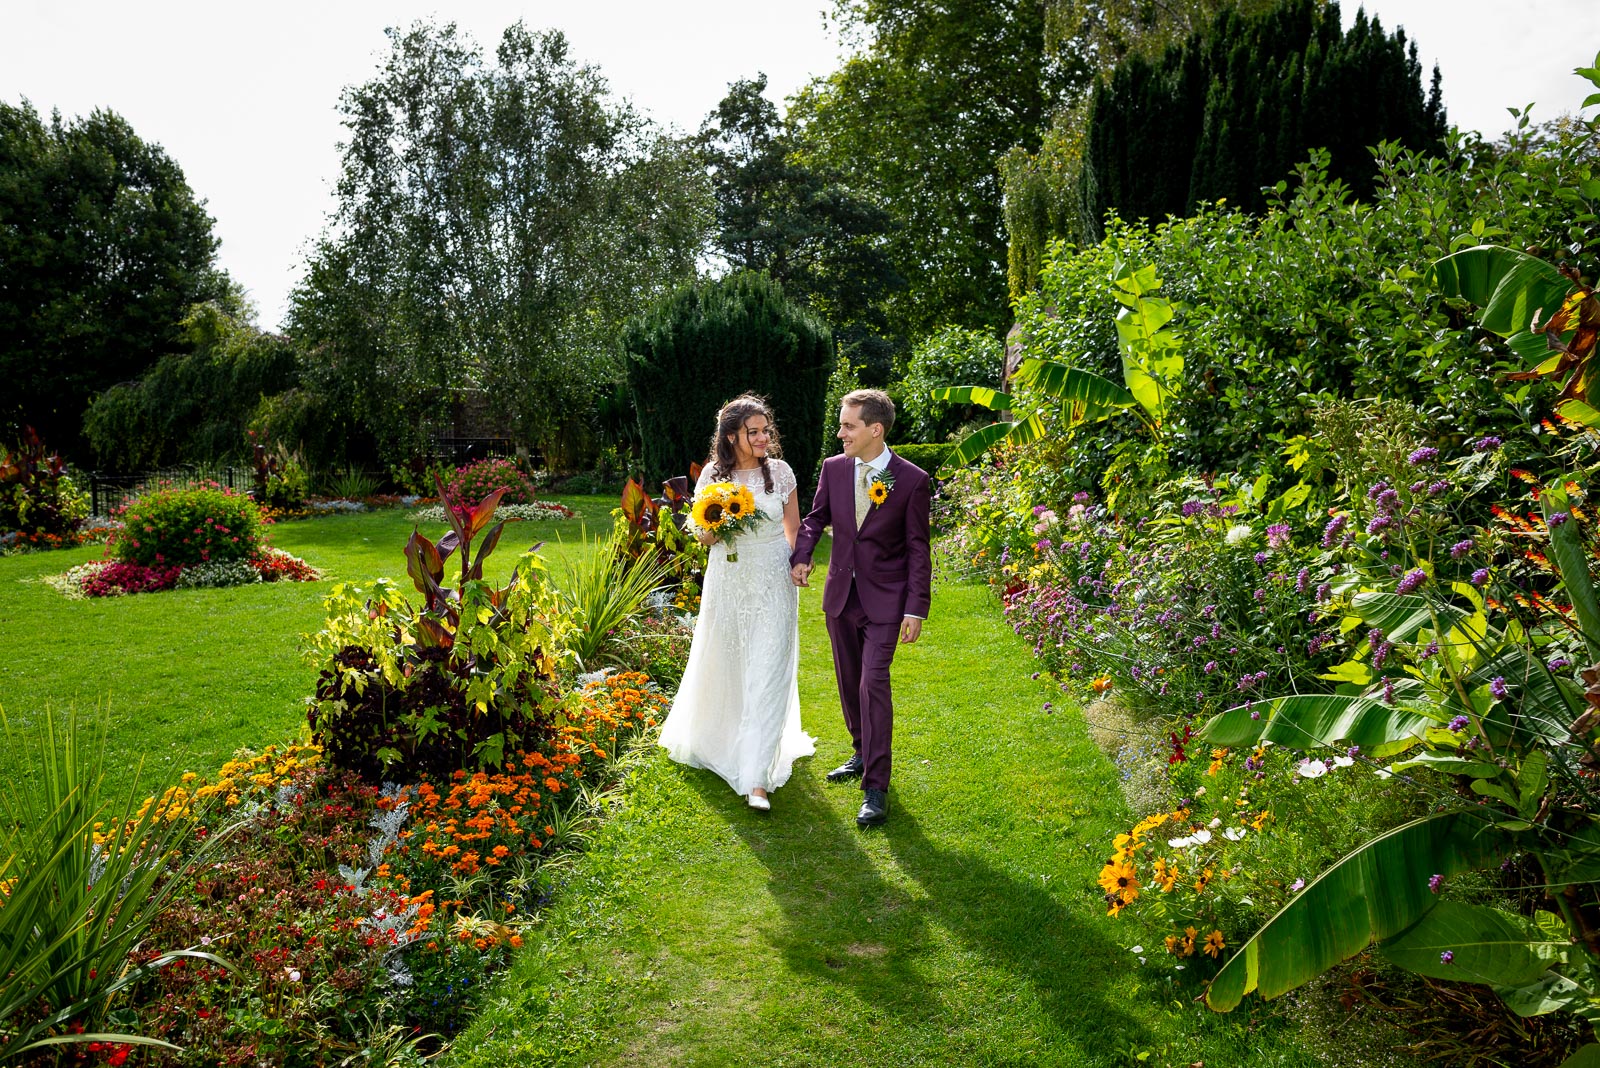 Ashley and Anjana walk between the blooming flower beds in Southover Grange, Lewes after their wedding.